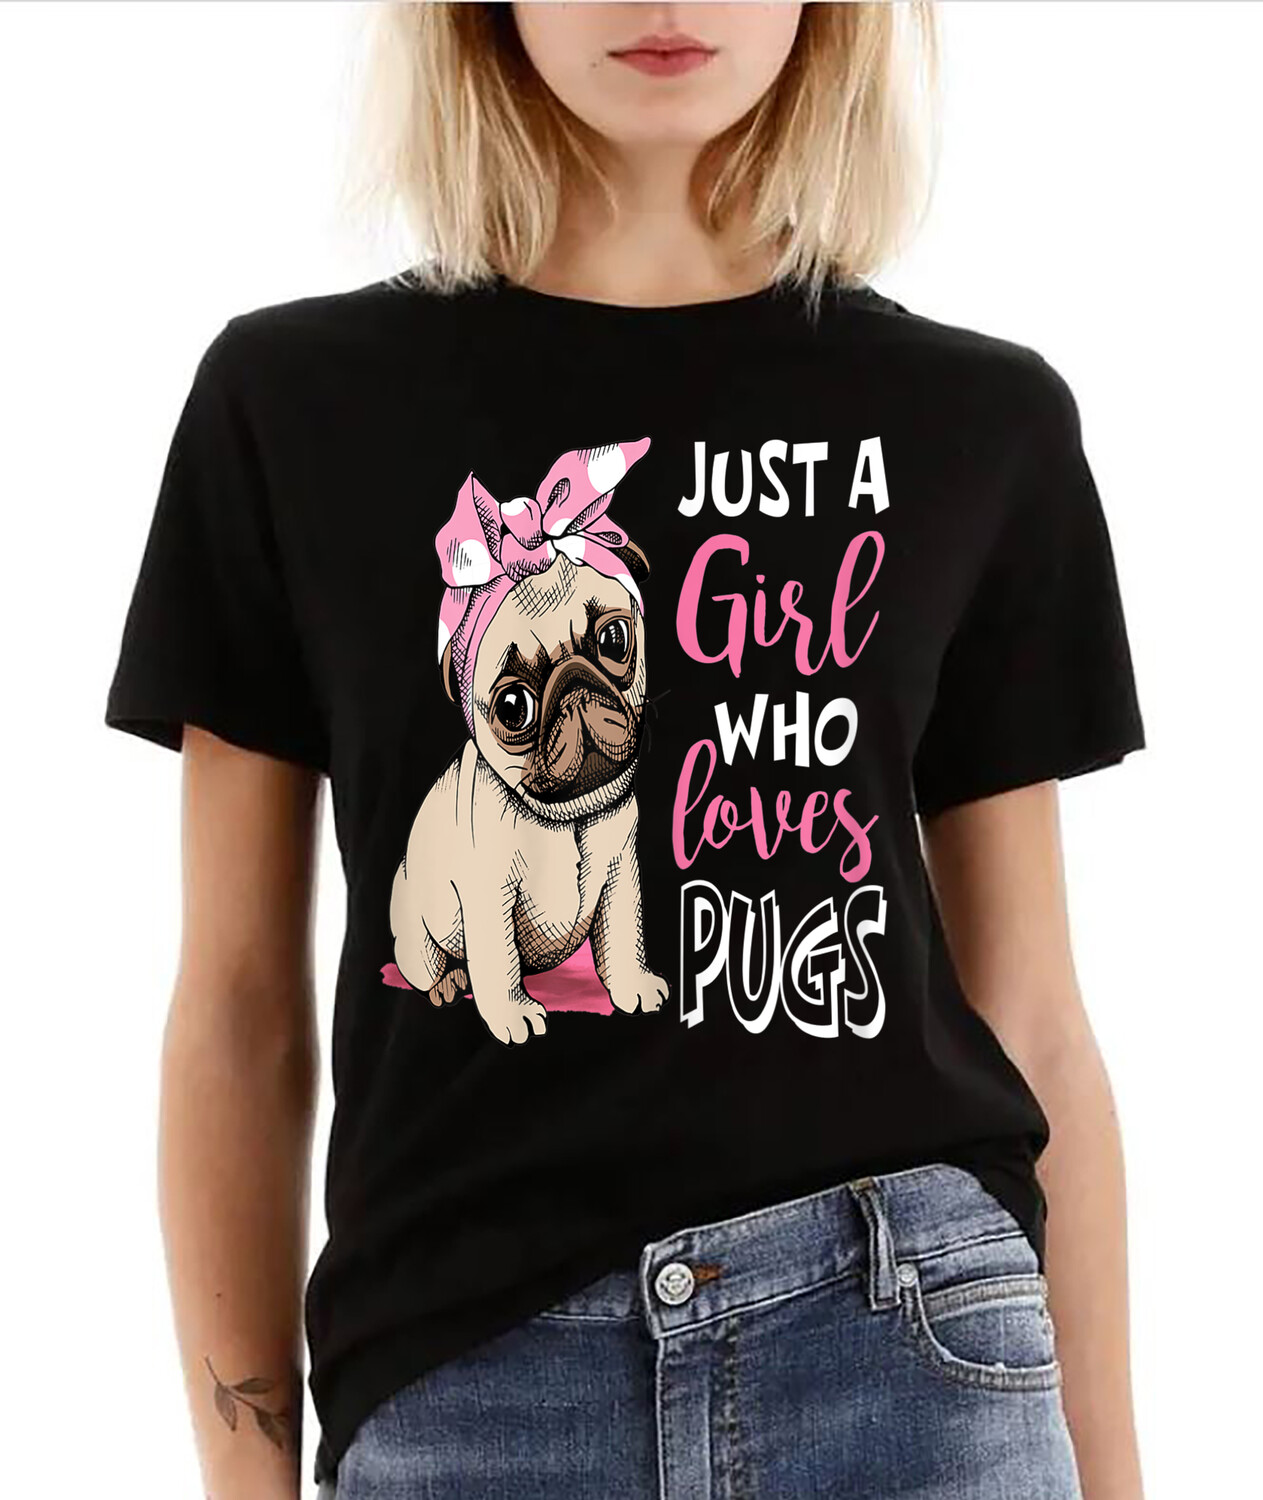 Just a Girl Who Loves Pugs: Cute Pug Dog Lover T-Shirt